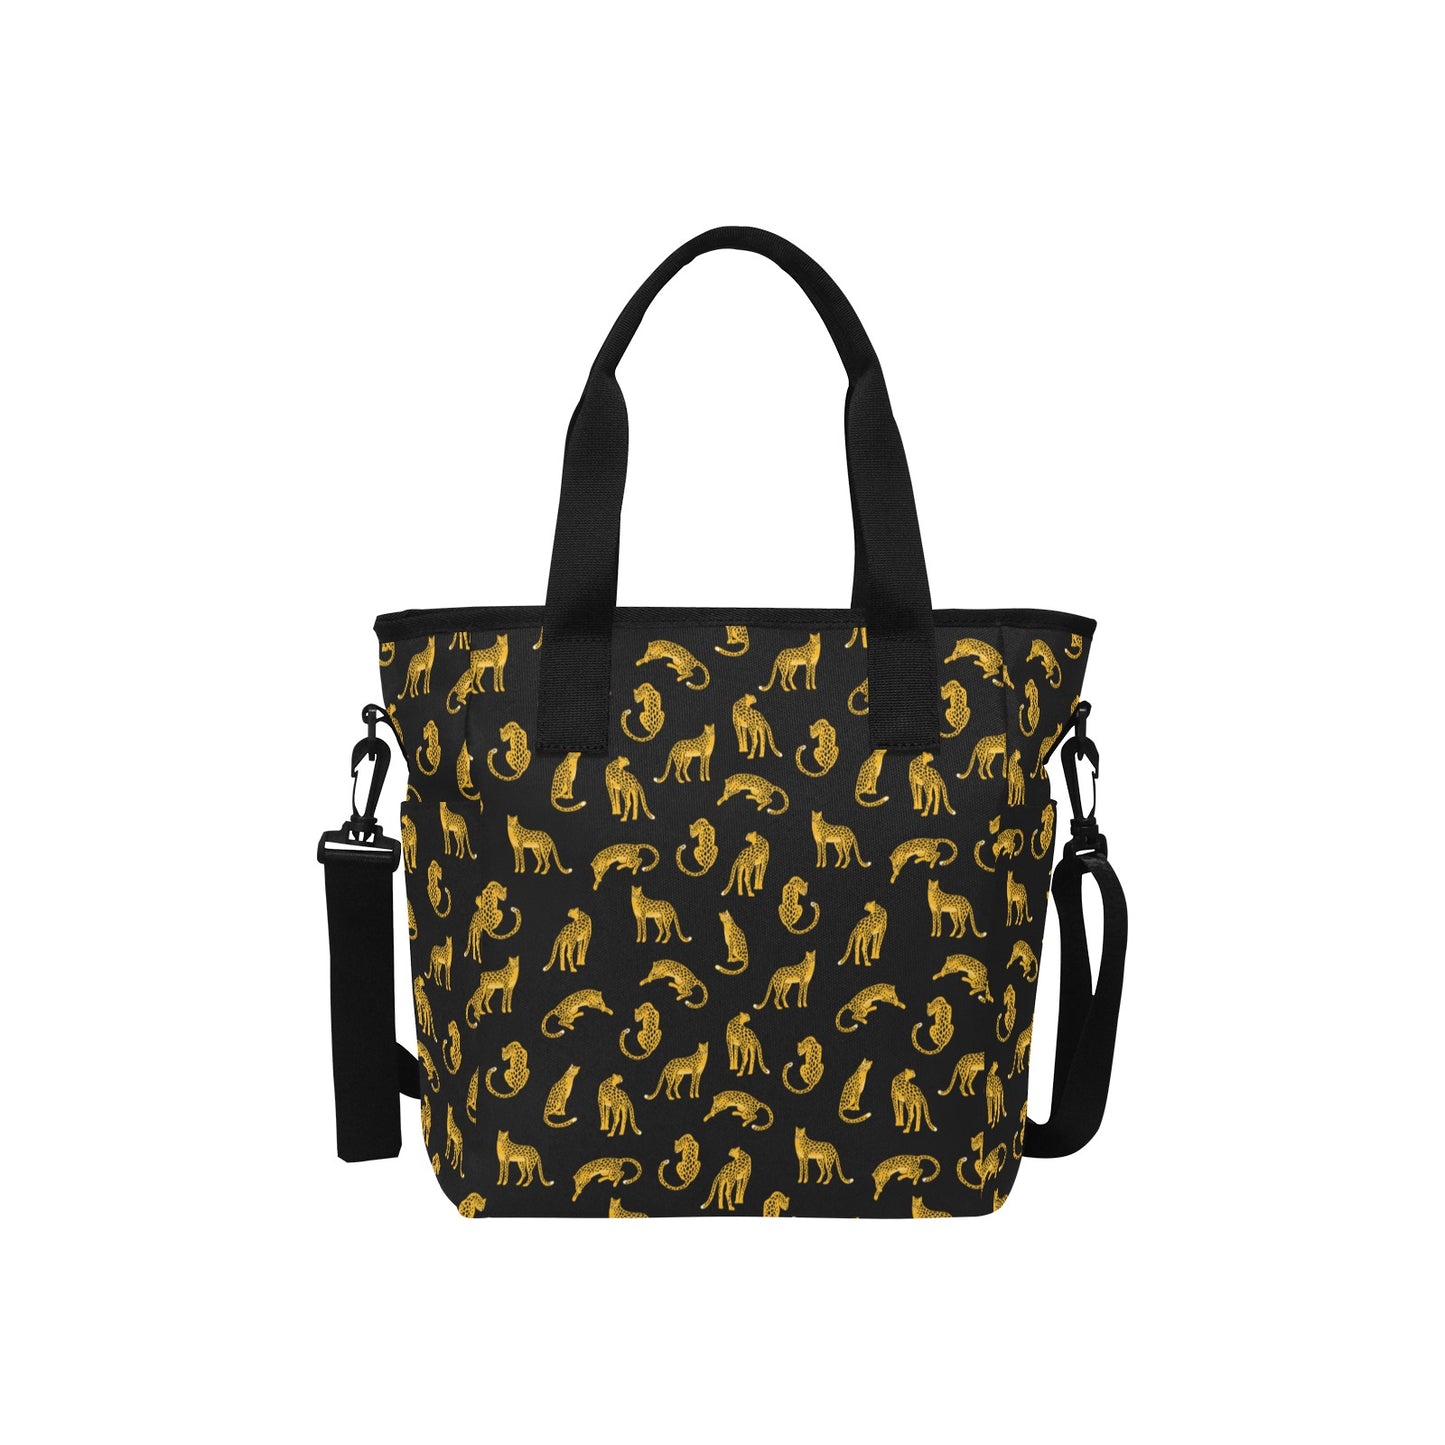 Leopard Canvas Tote Bag with Shoulder Strap, Animal Print Black Beach Summer Aesthetic Shopping Reusable Bag with Pockets